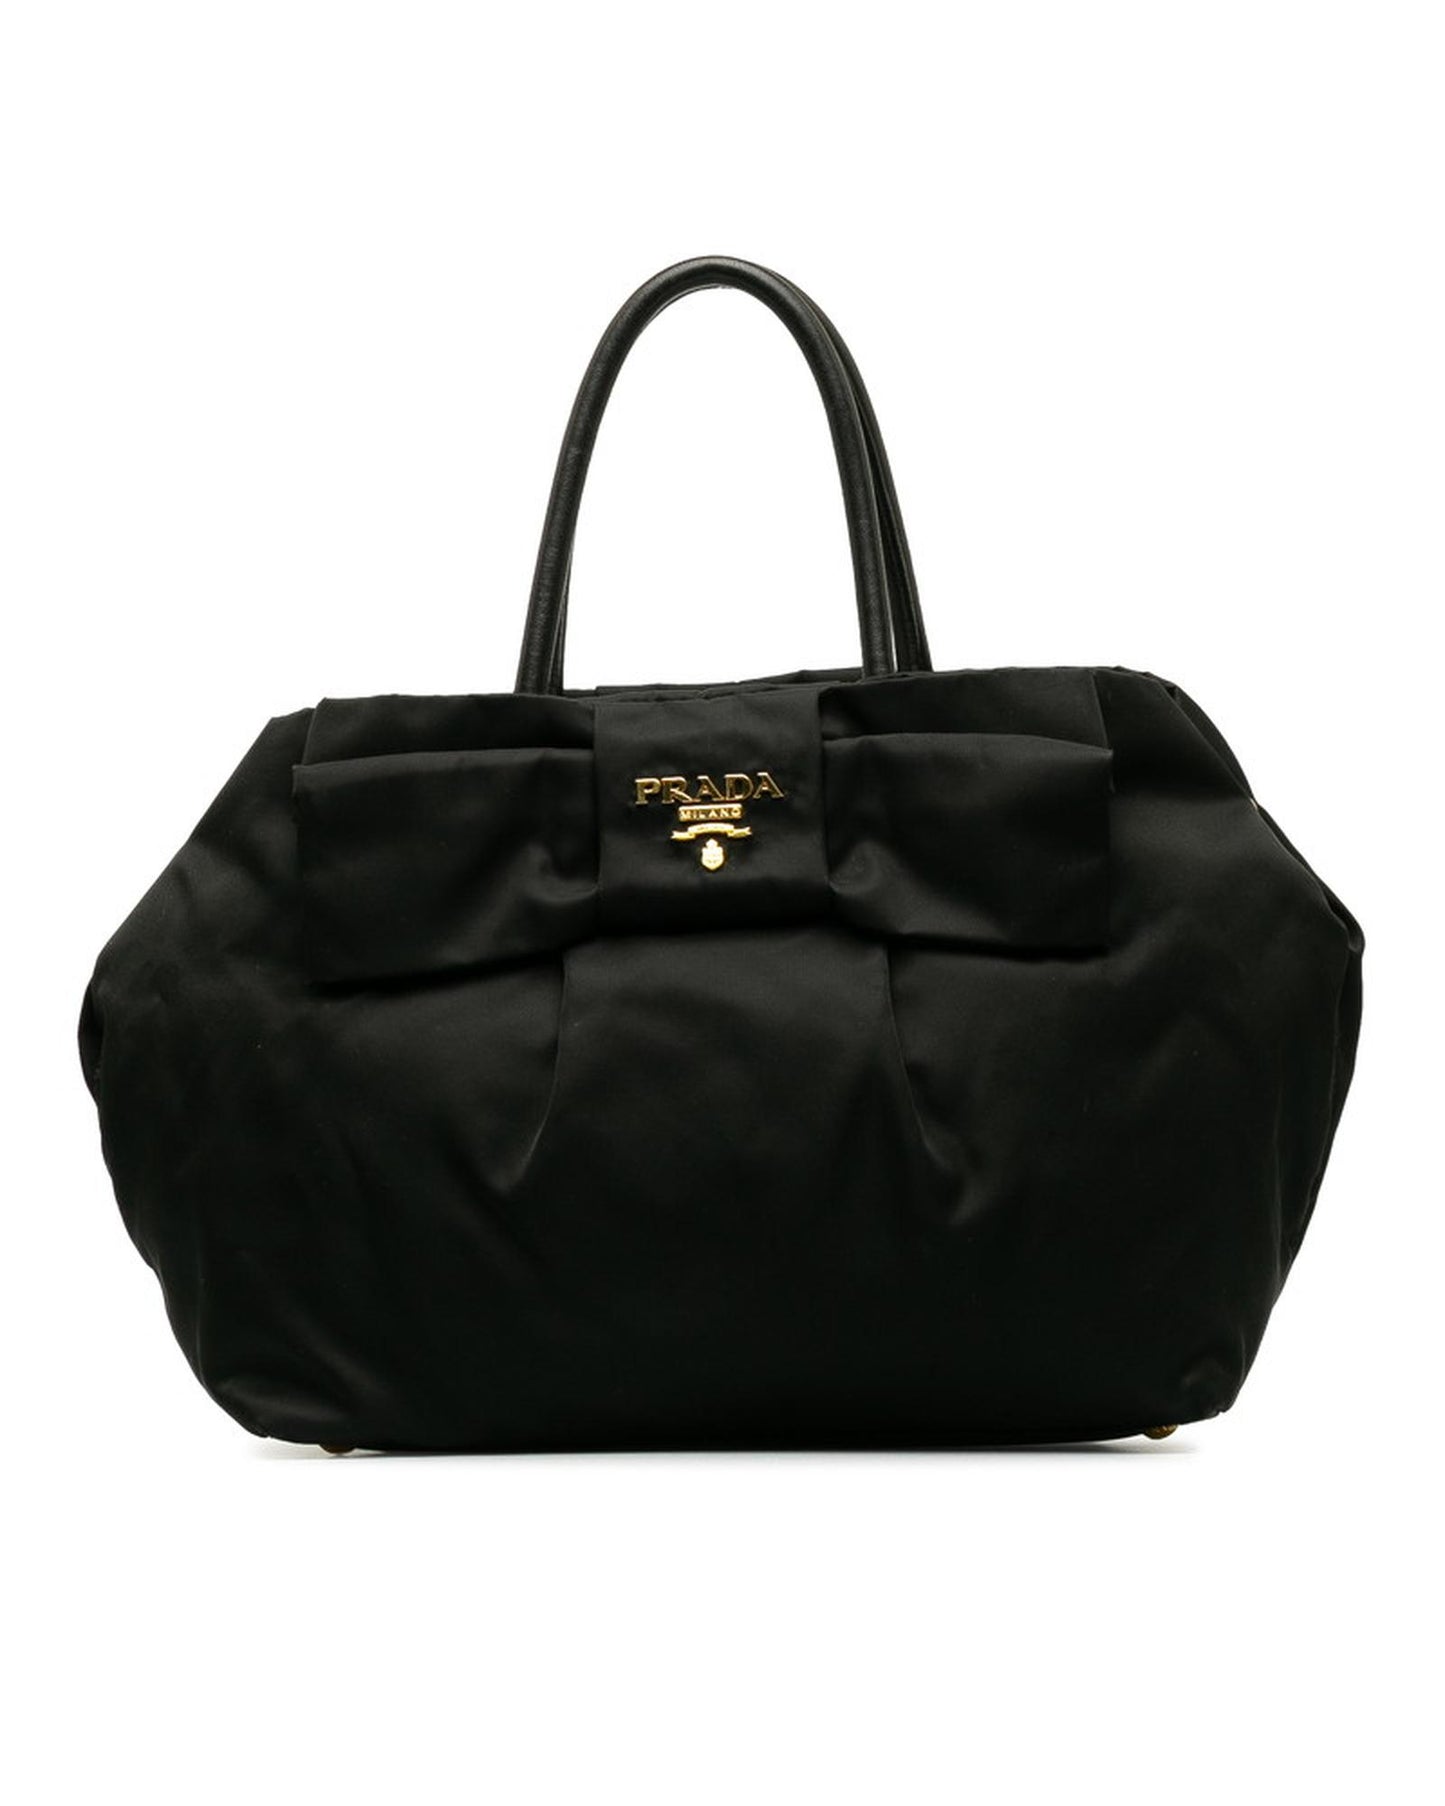 Prada Women's Black Bow Tote Bag in Excellent Condition in Black